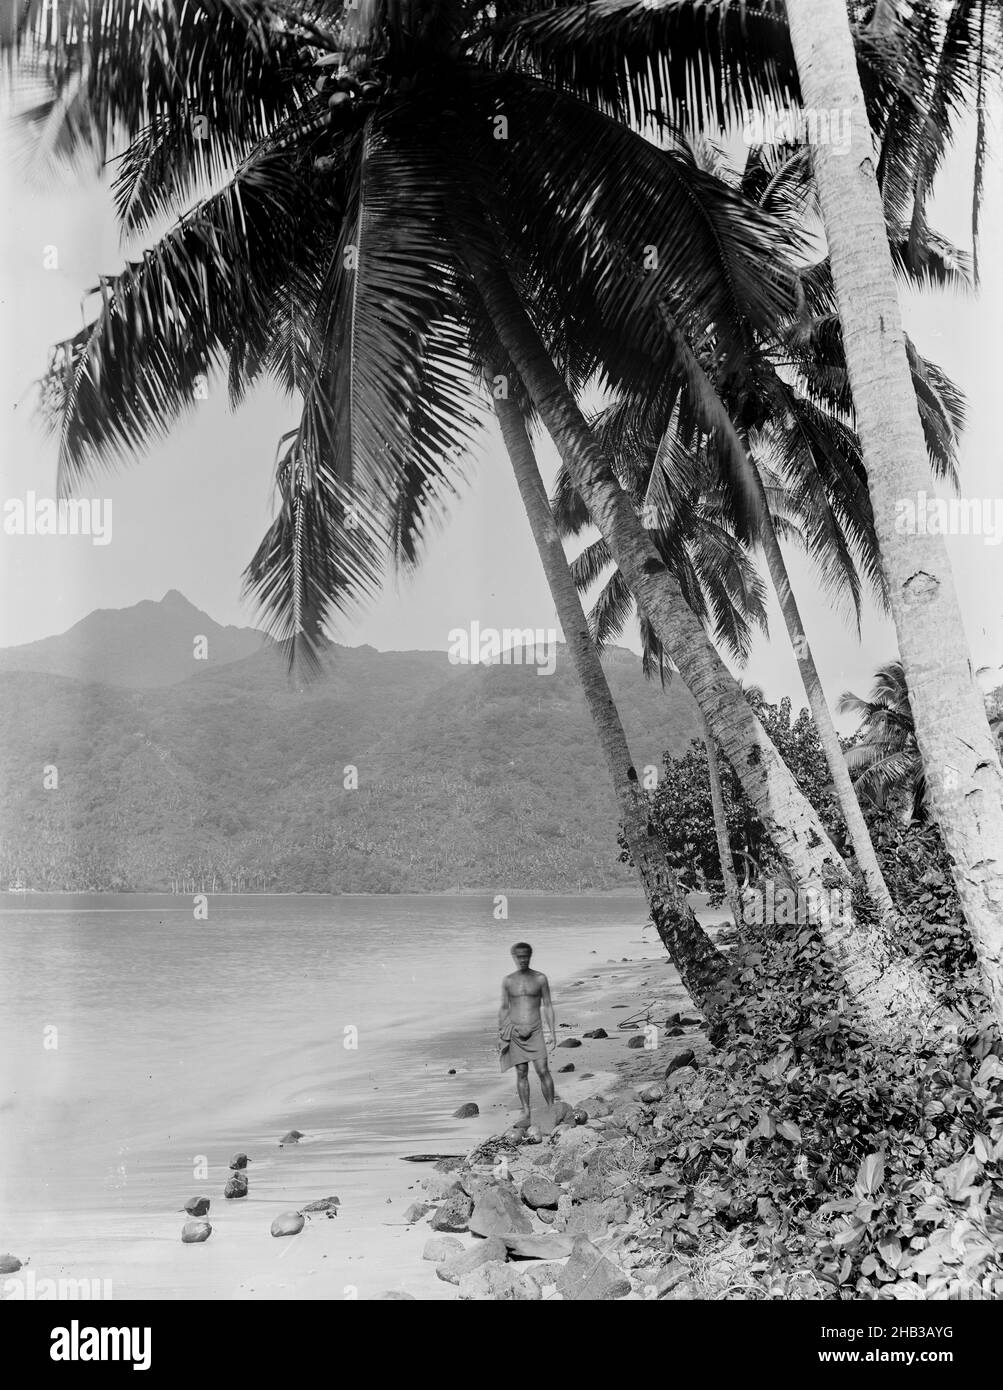 [Pango Pango (sic). Cocoa Nuts], Burton Brothers studio, photography studio, 1884, Dunedin, gelatin dry plate process, Man stands on sandy foreshore, at foot of coconut palms (foreground right), sea to left of man and high mountain in background Stock Photo